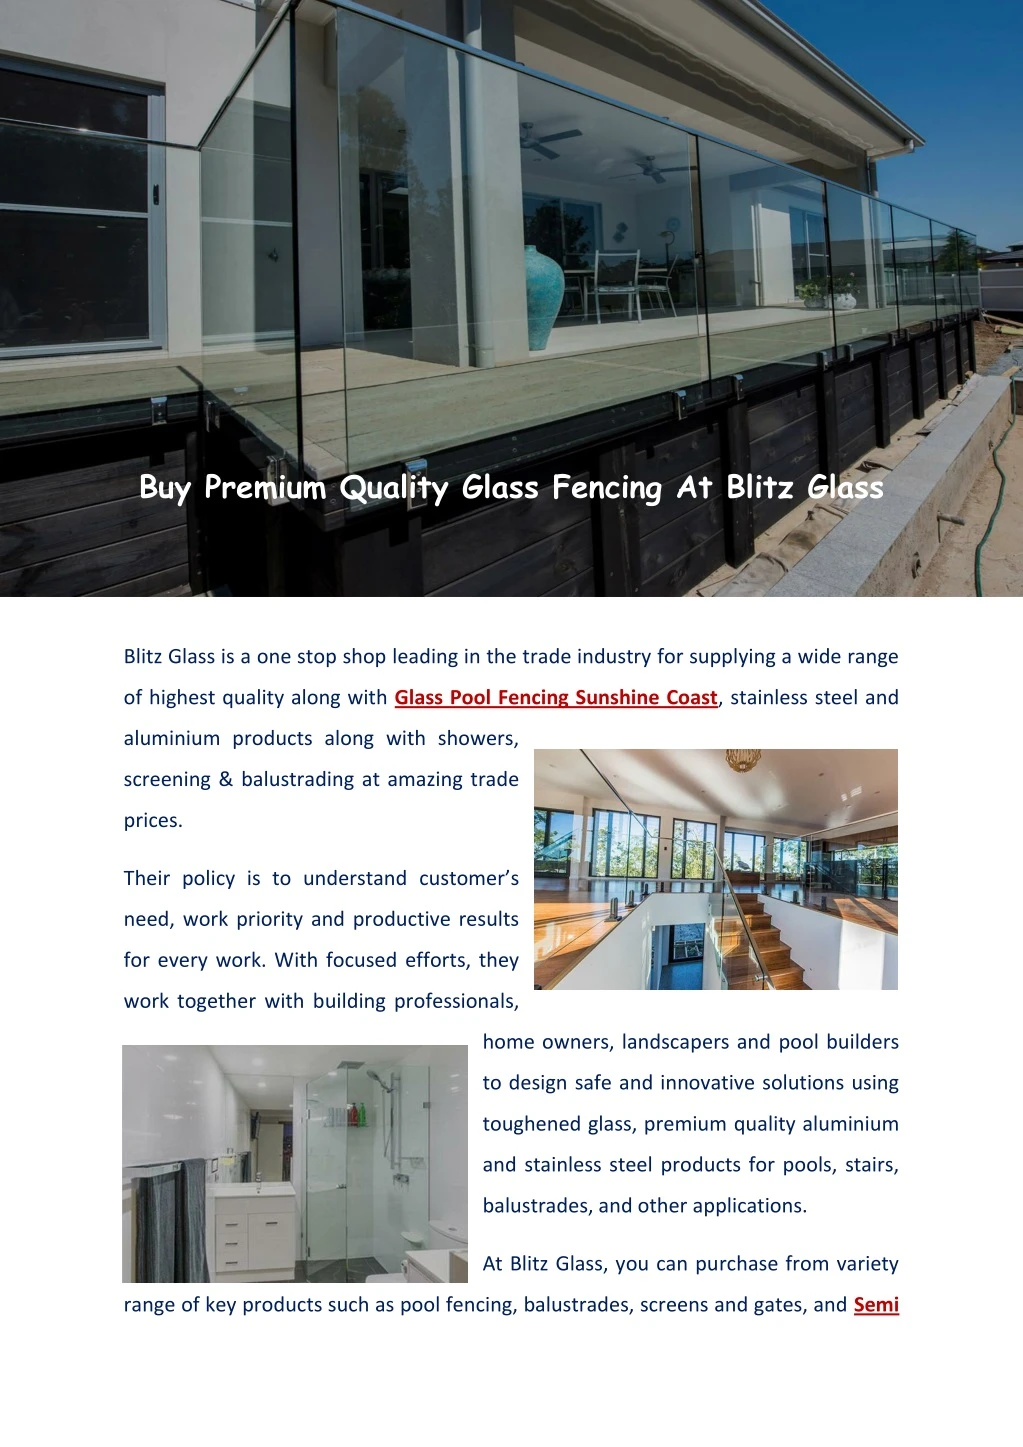 buy premium quality glass fencing at blitz glass